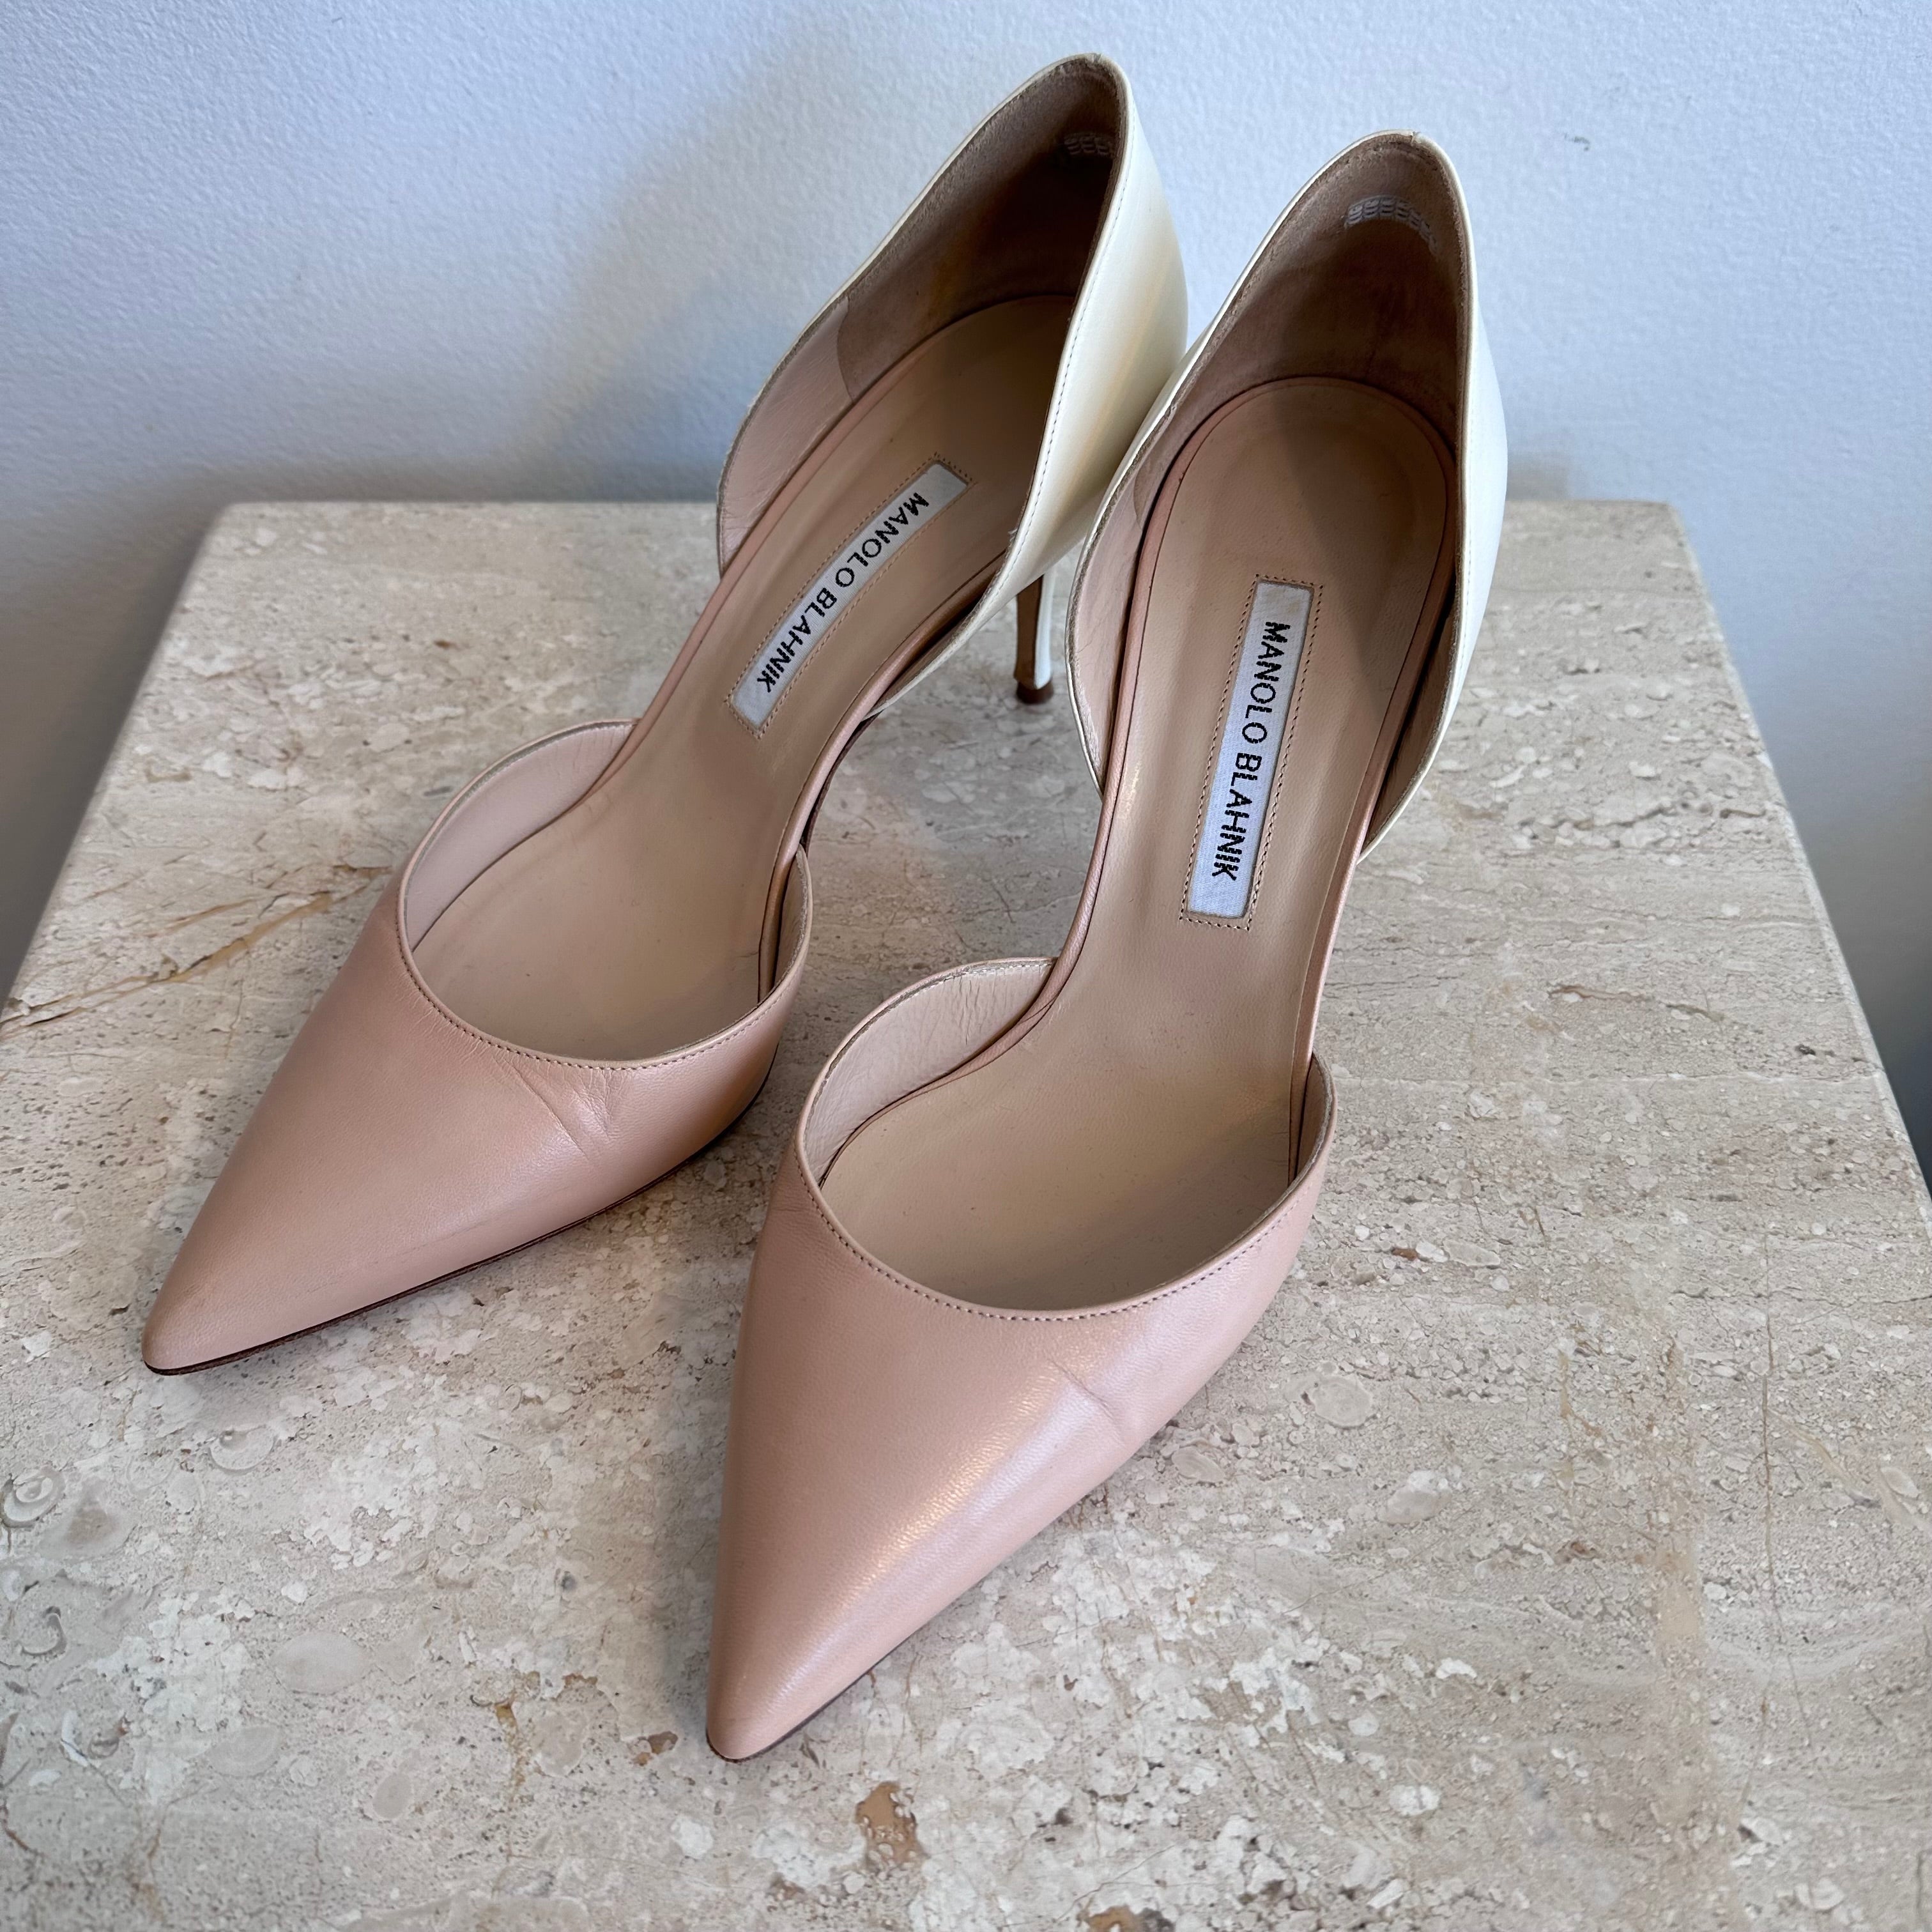 Pre-Owned Manolo Blahnik Beige/Ivory Leather Pumps - Size 41